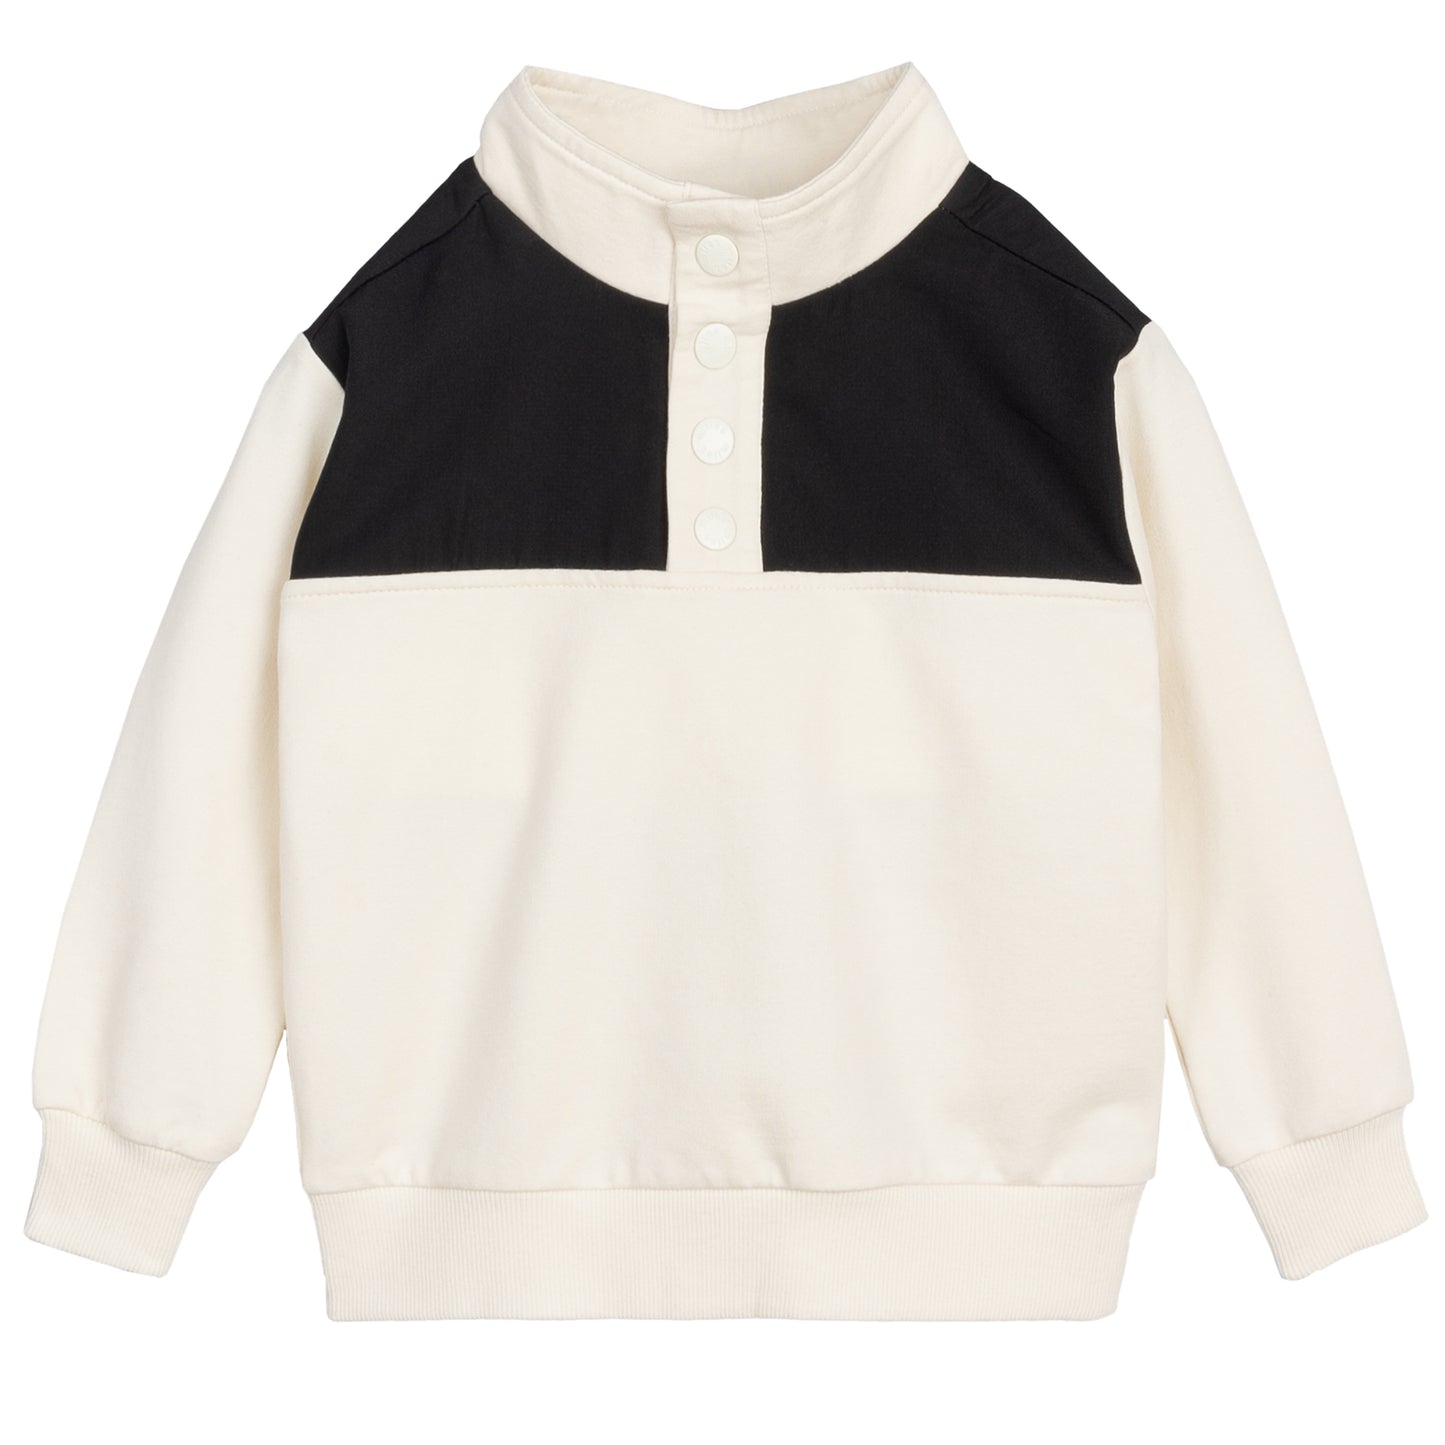 Pull-over Sweater - Off White / Black